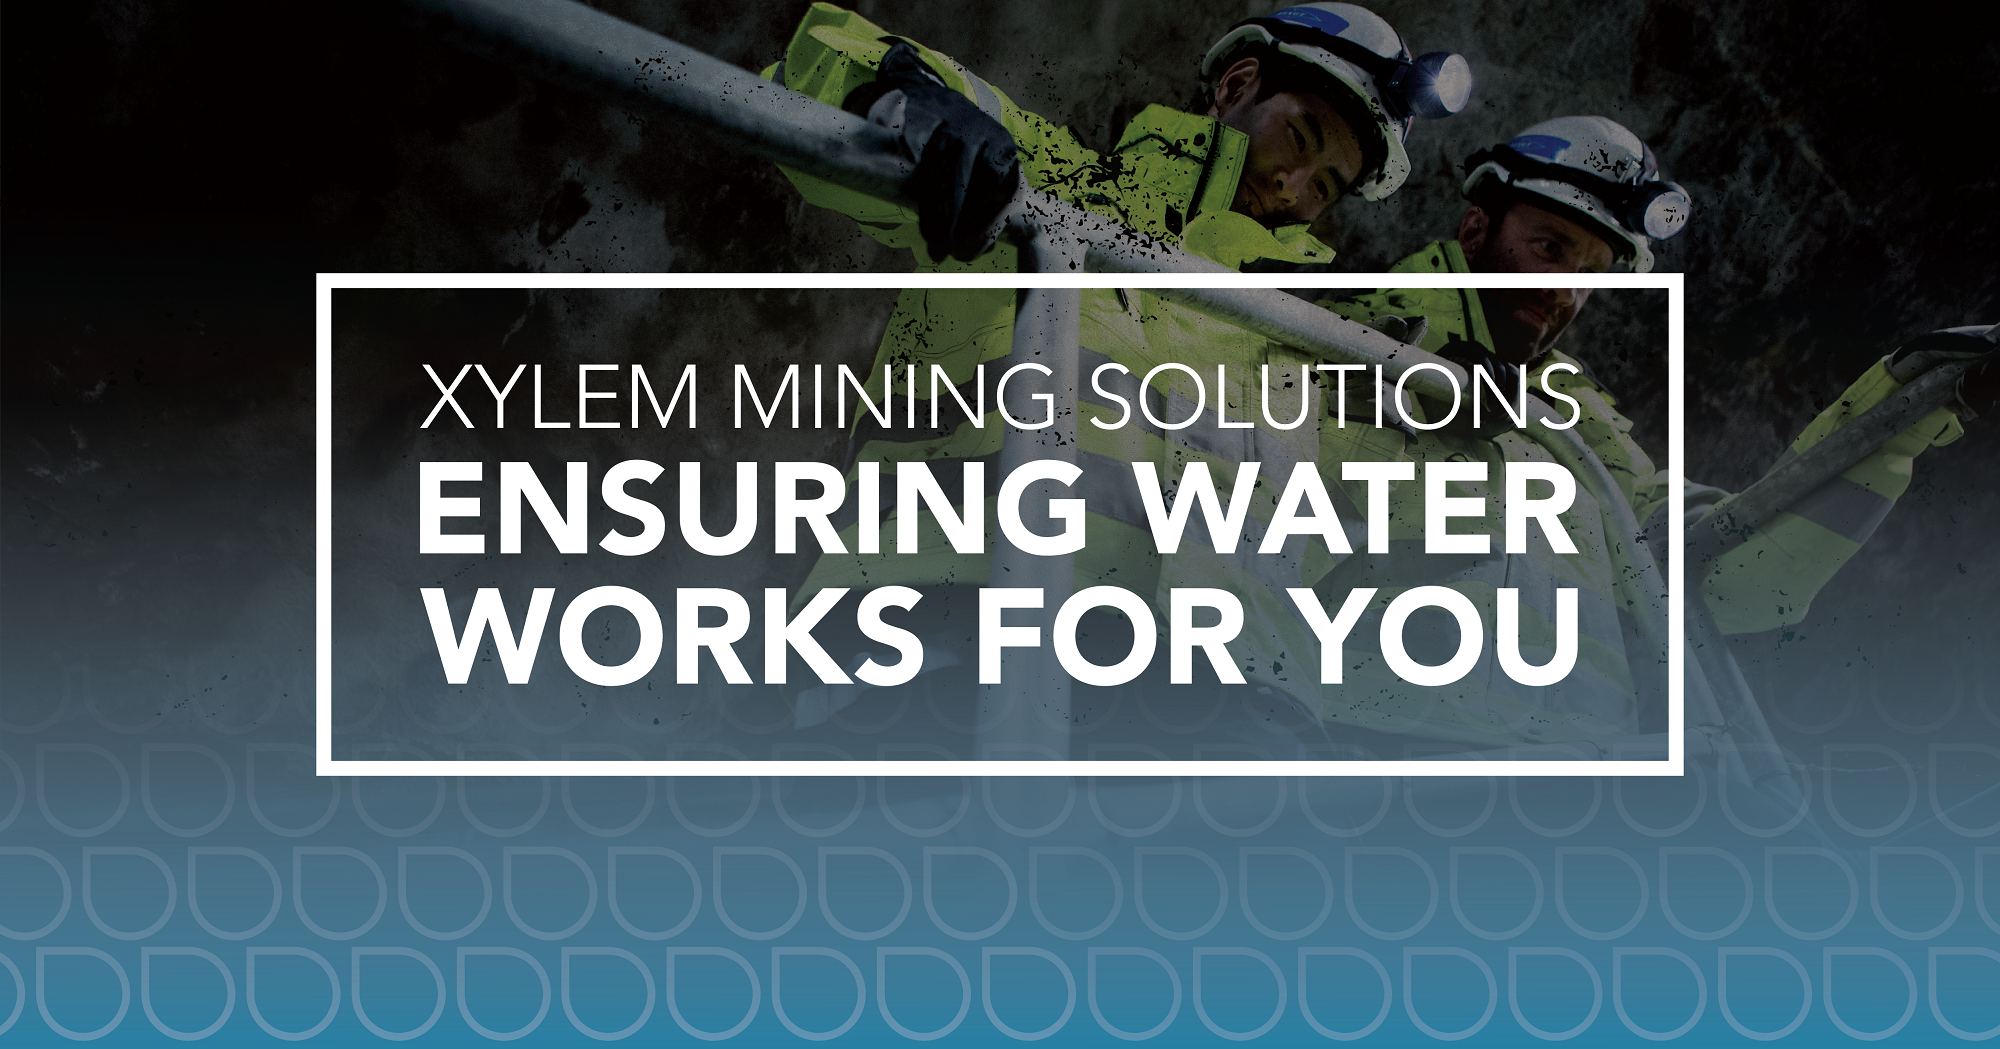 Xylem exhibited its holistic smart water management solutions at MINExpo in Las Vegas.